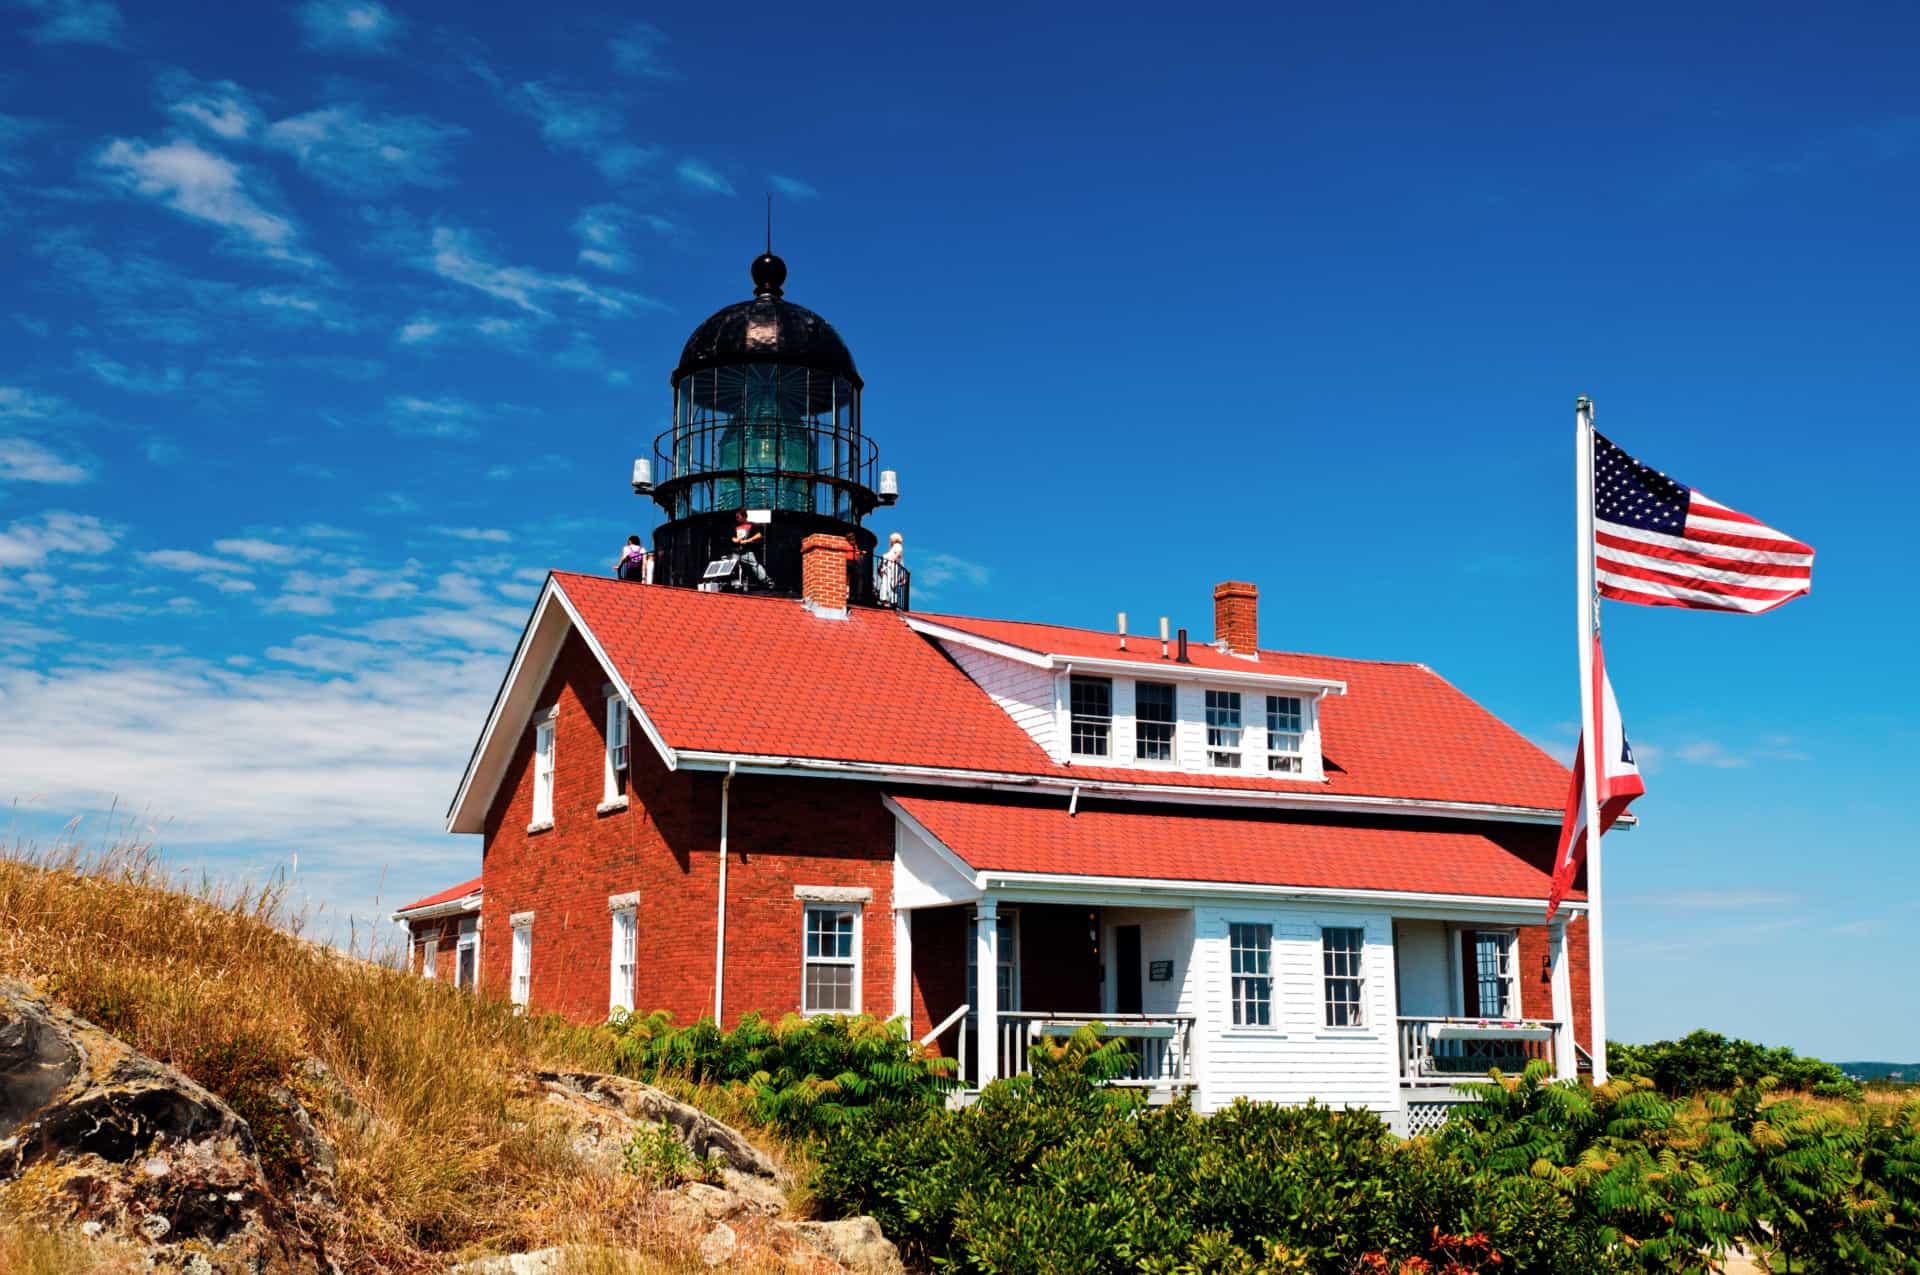 A glorious location in stunning surroundings makes any visit to this scenic lighthouse a memorable day out. The island is noted for its marine and environmental history. The lighthouse itself dates from 1795 and is now a museum.